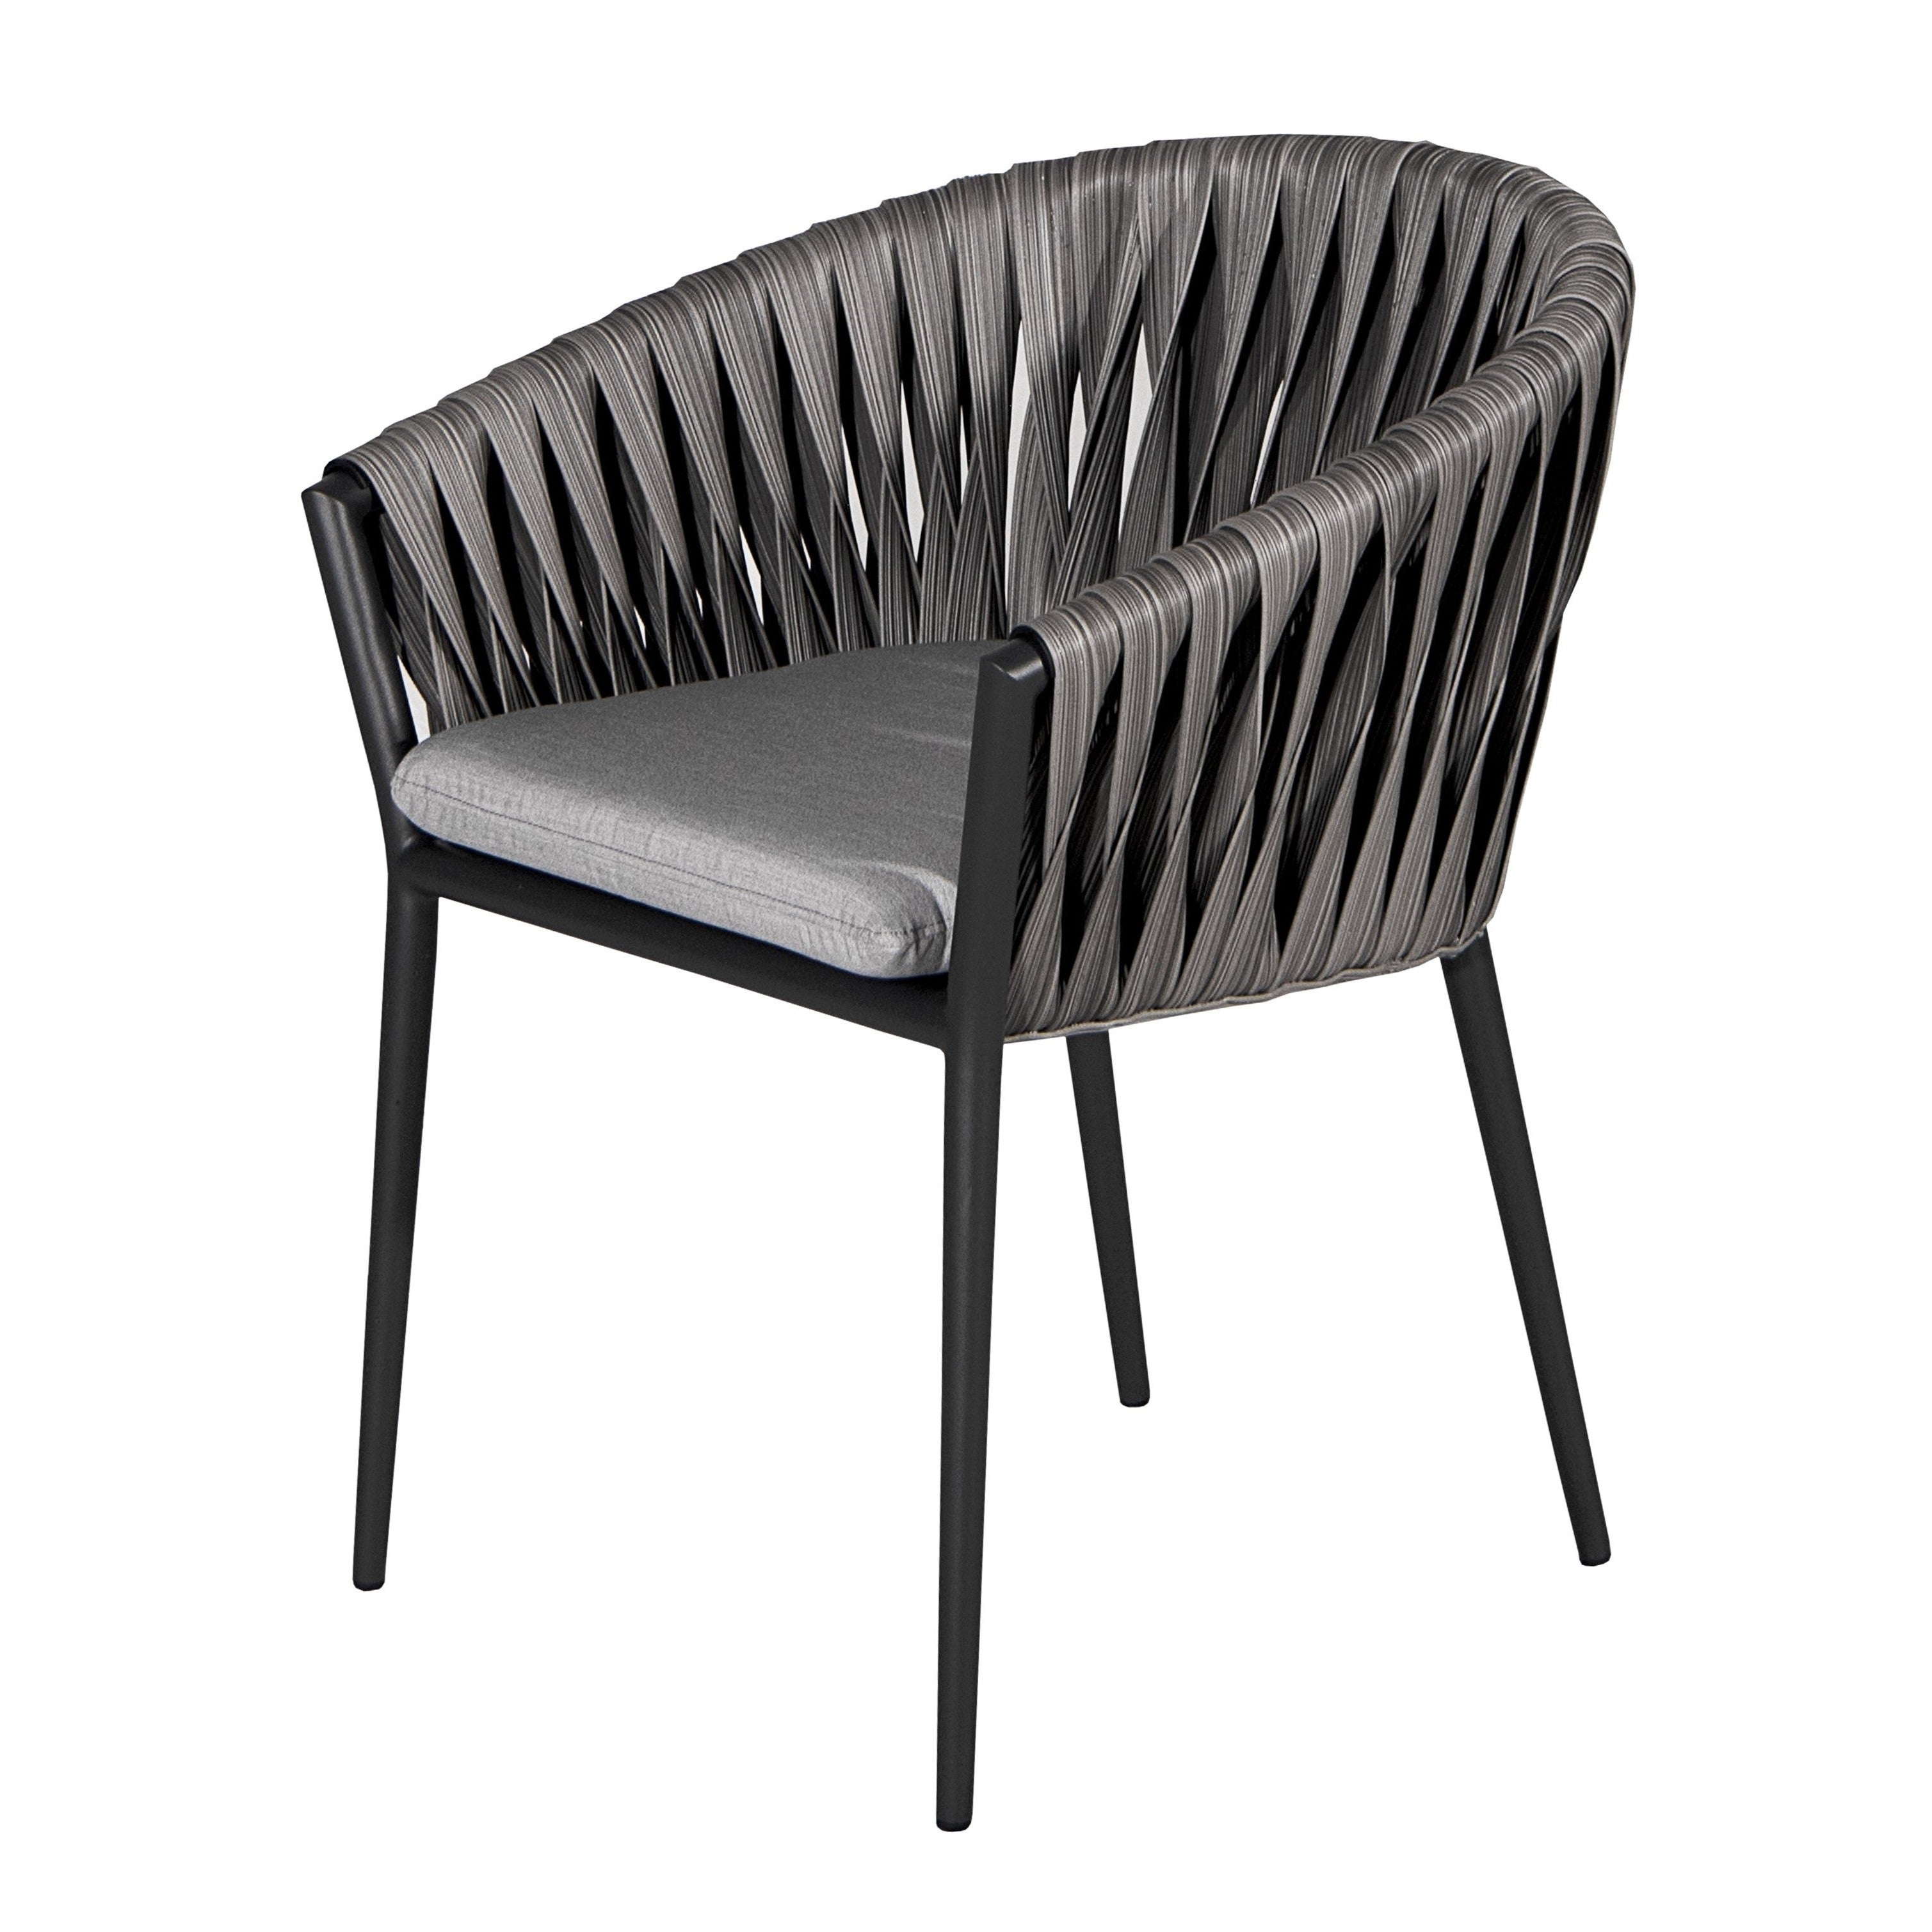 Tula Dining Chair